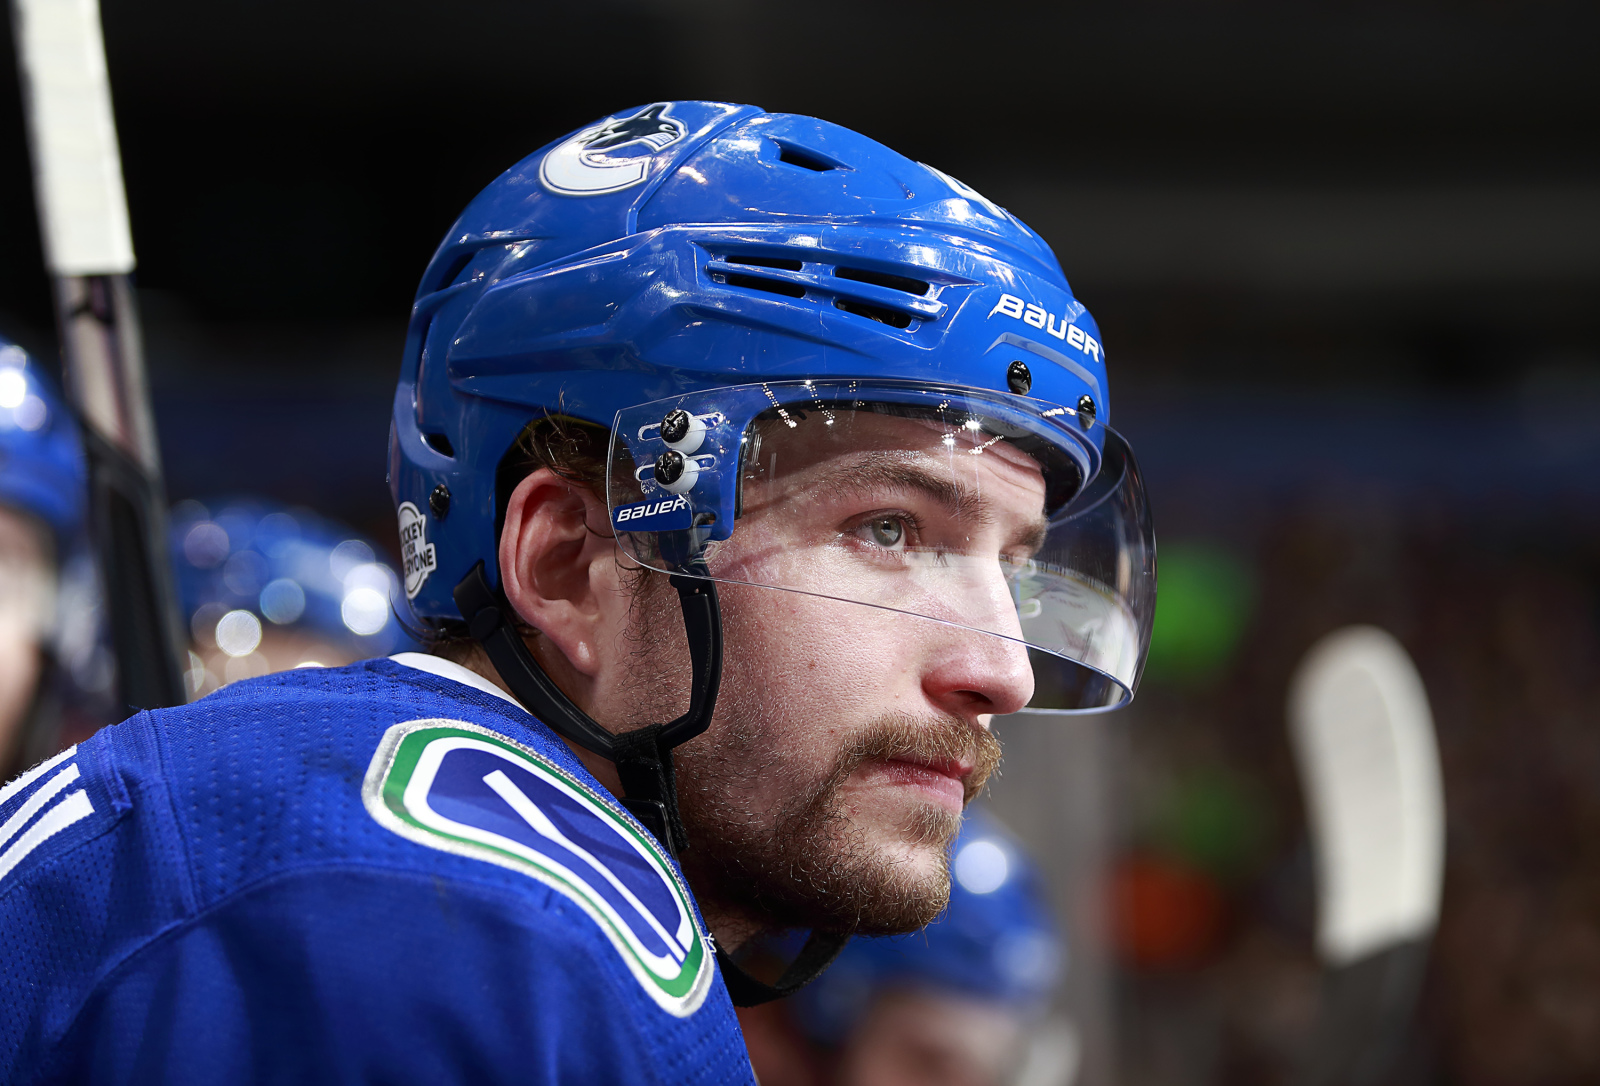 Vancouver Canucks working towards bridging the gap with the